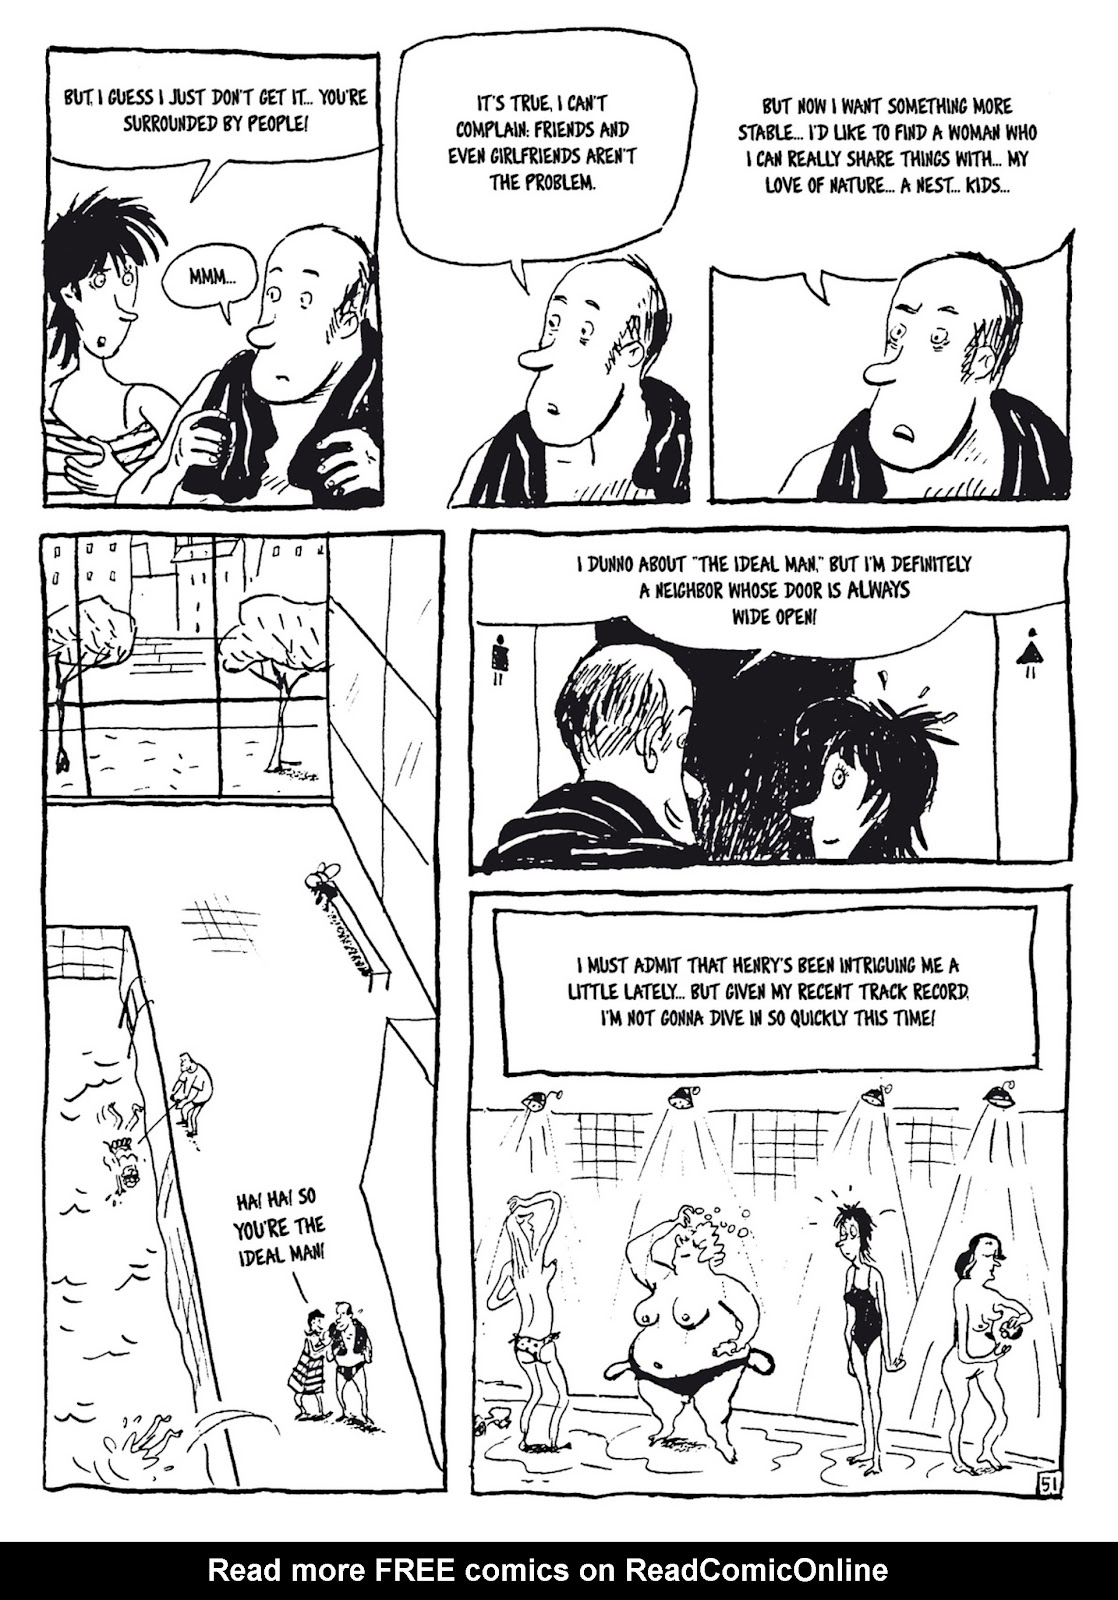 Bluesy Lucy - The Existential Chronicles of a Thirtysomething issue 2 - Page 6